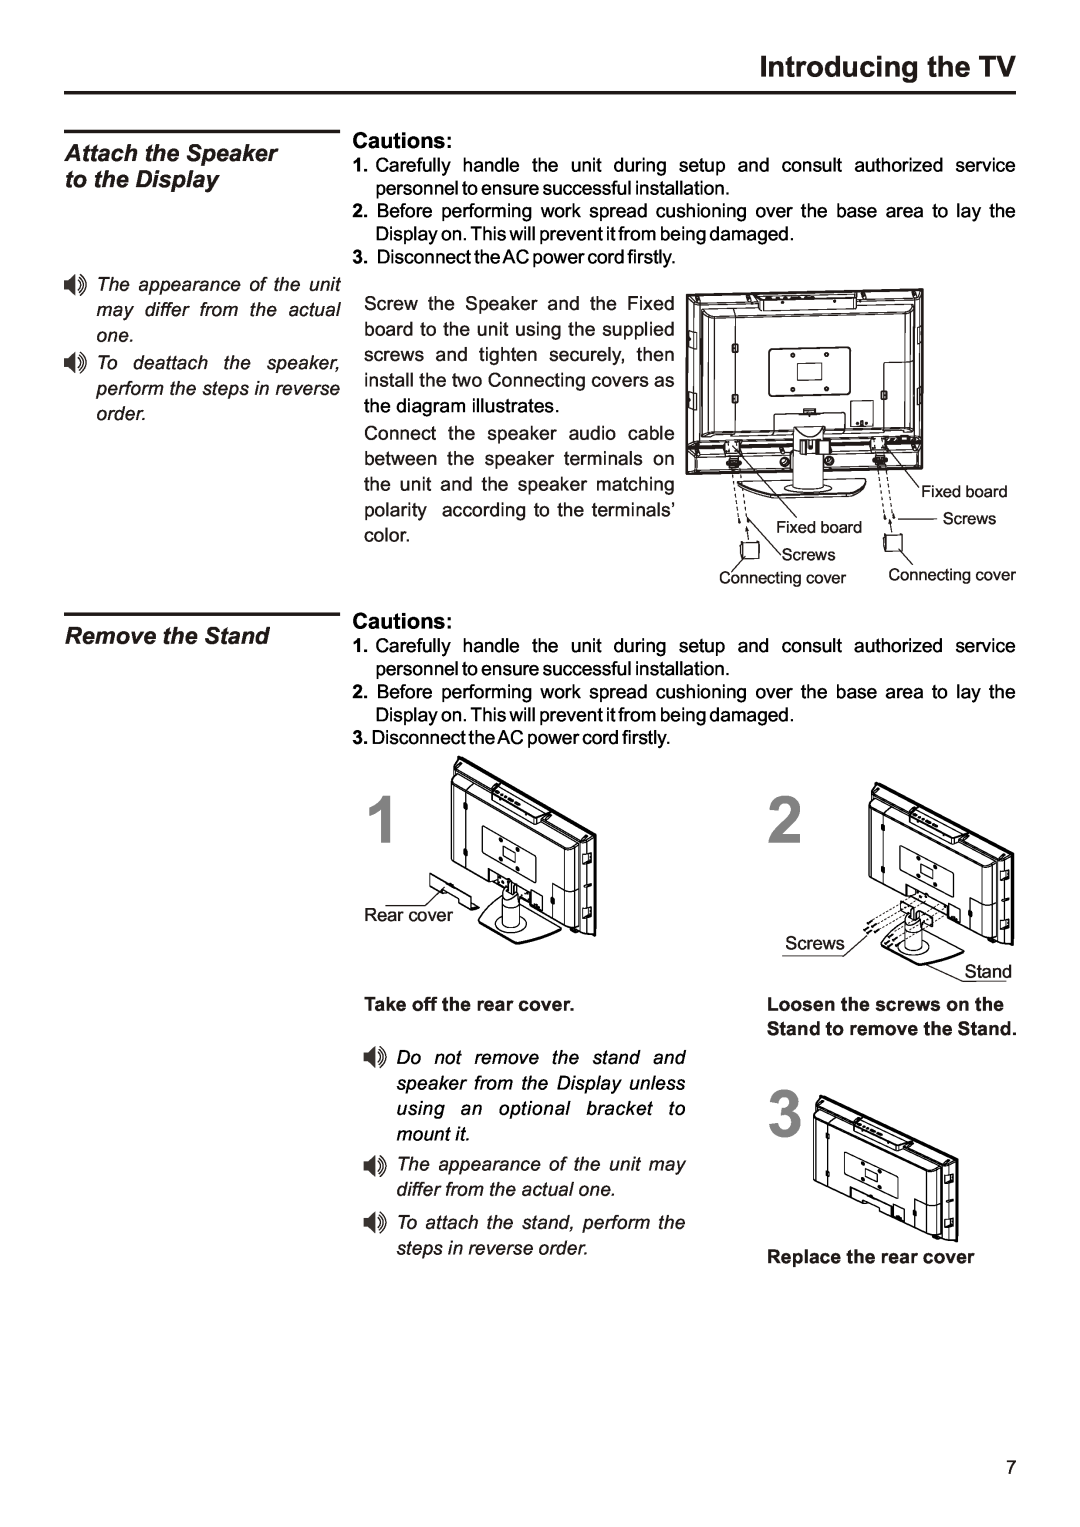 Audiovox FPE3207 operation manual Attach the Speaker to the Display, Remove the Stand, Cautions, Introducing the TV 